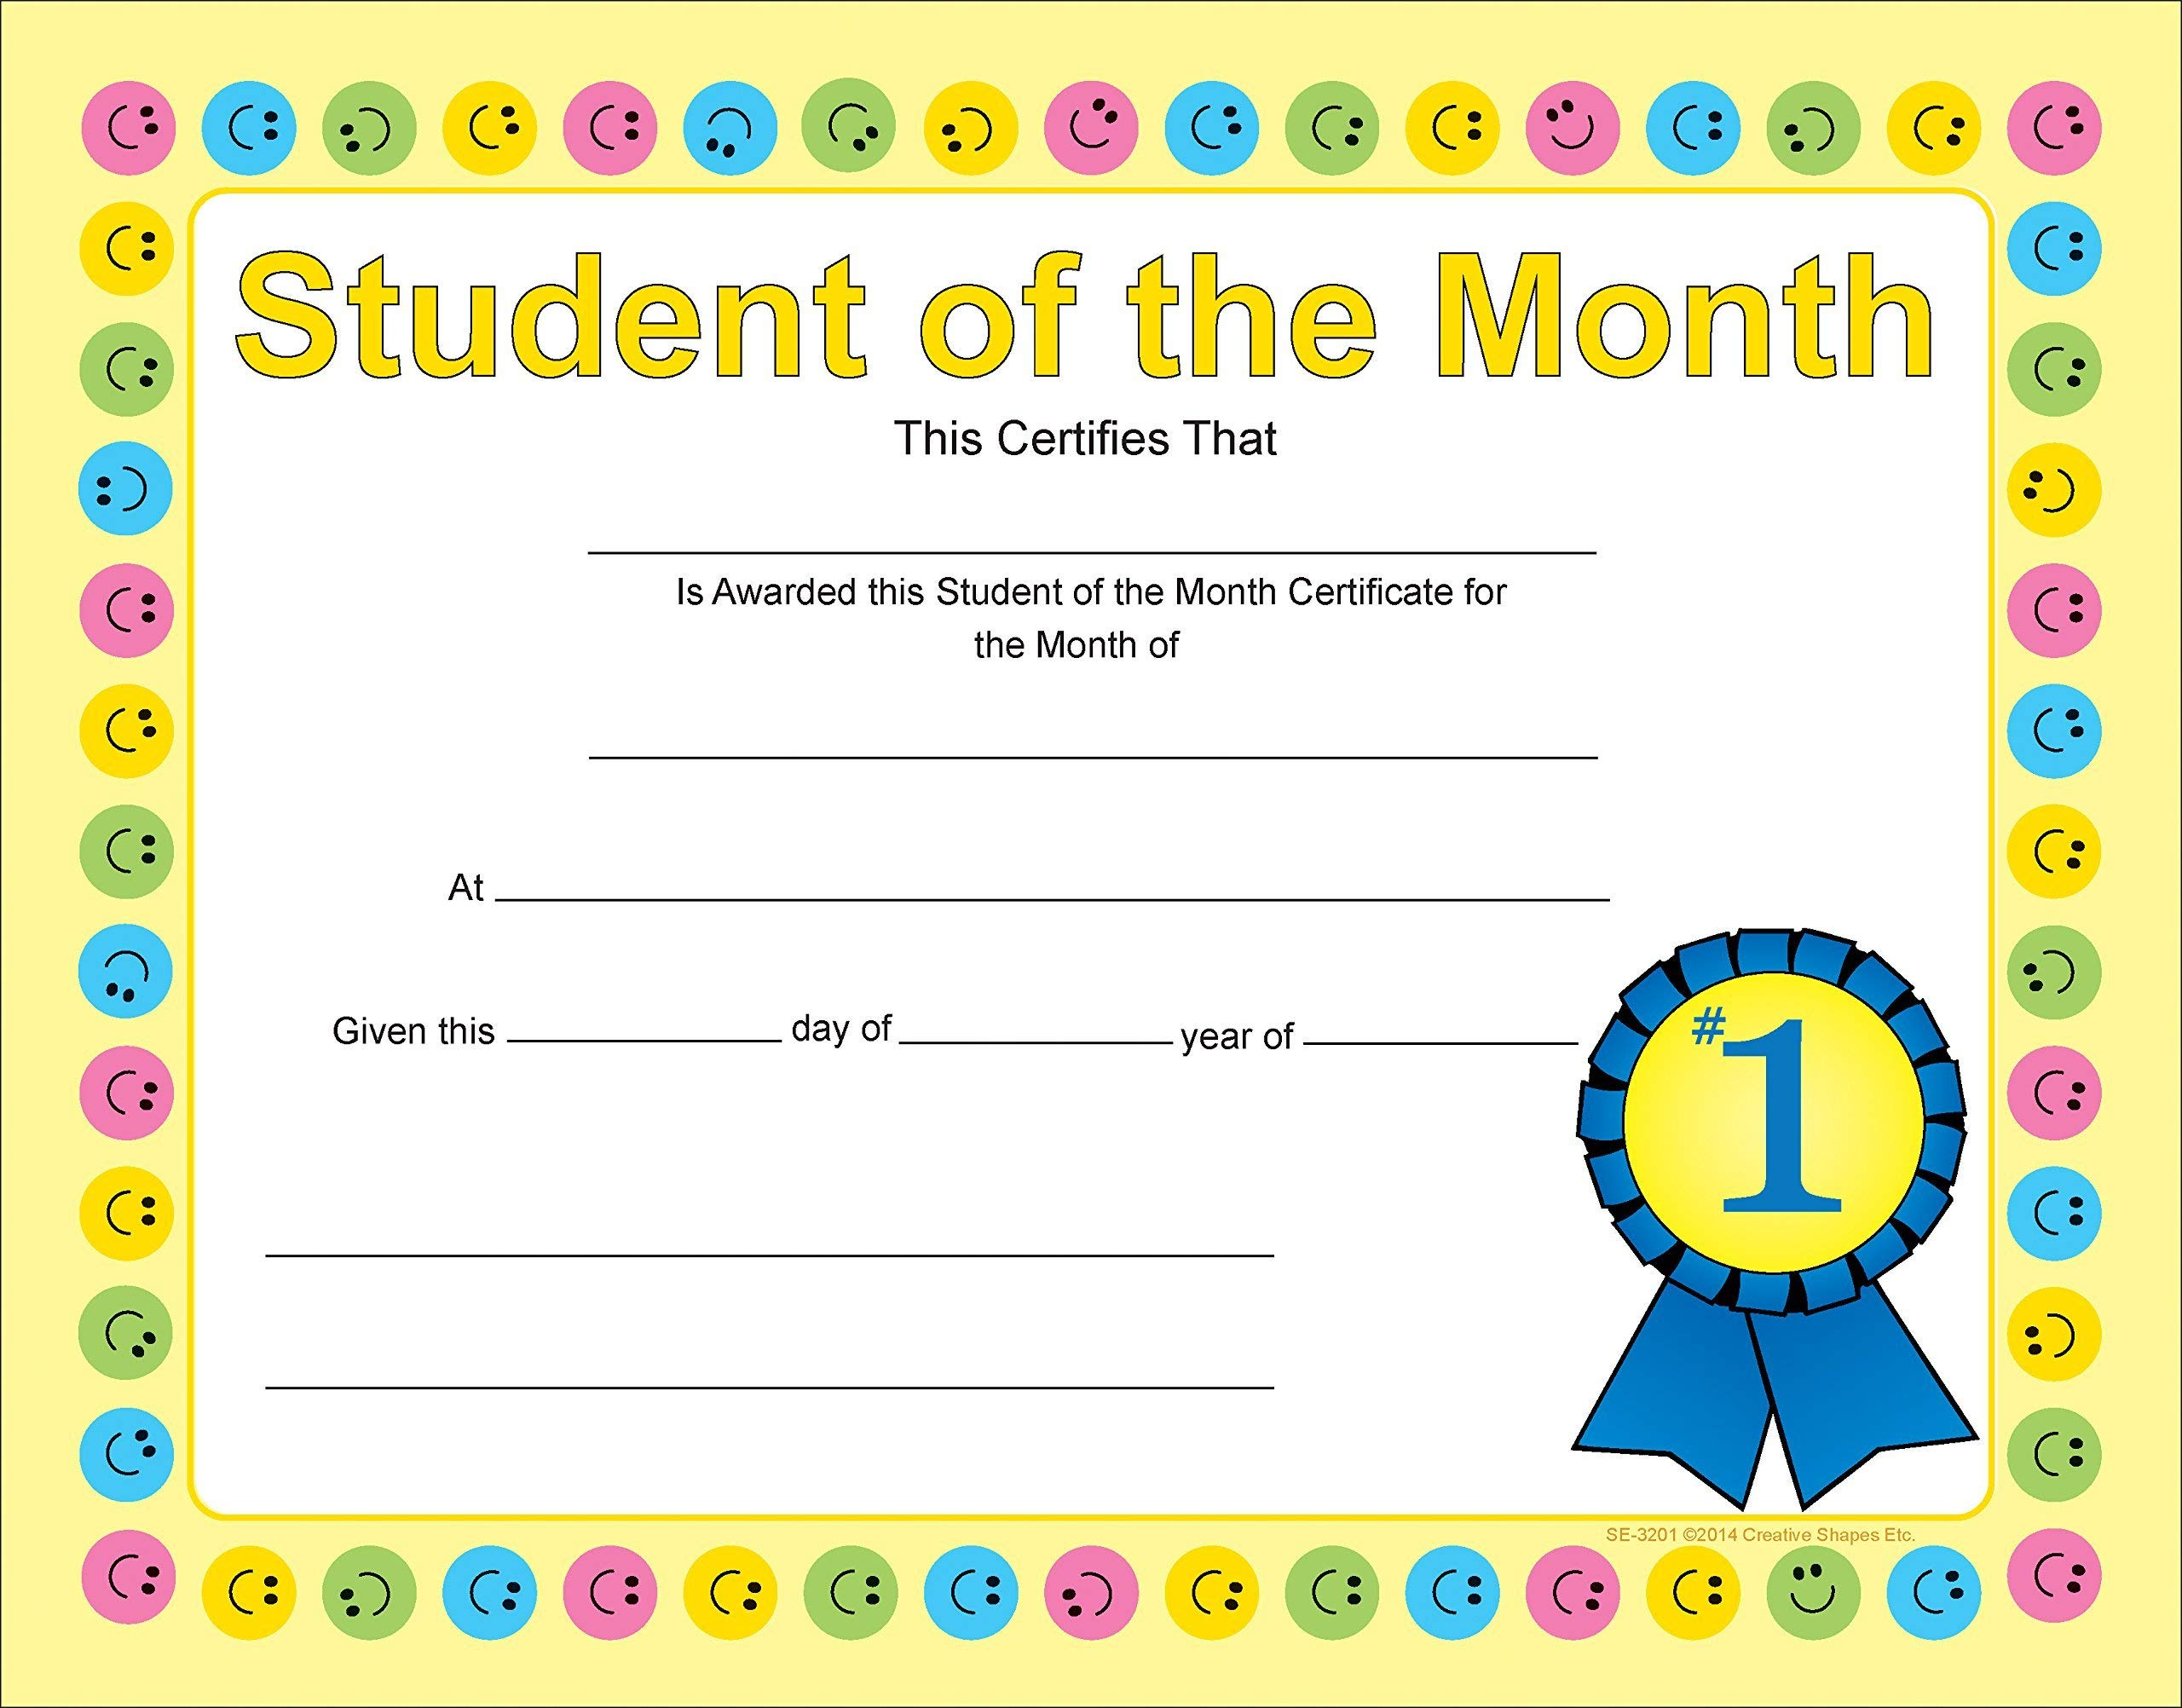 Recognition Certificate - Student of The Month, 10" x 10